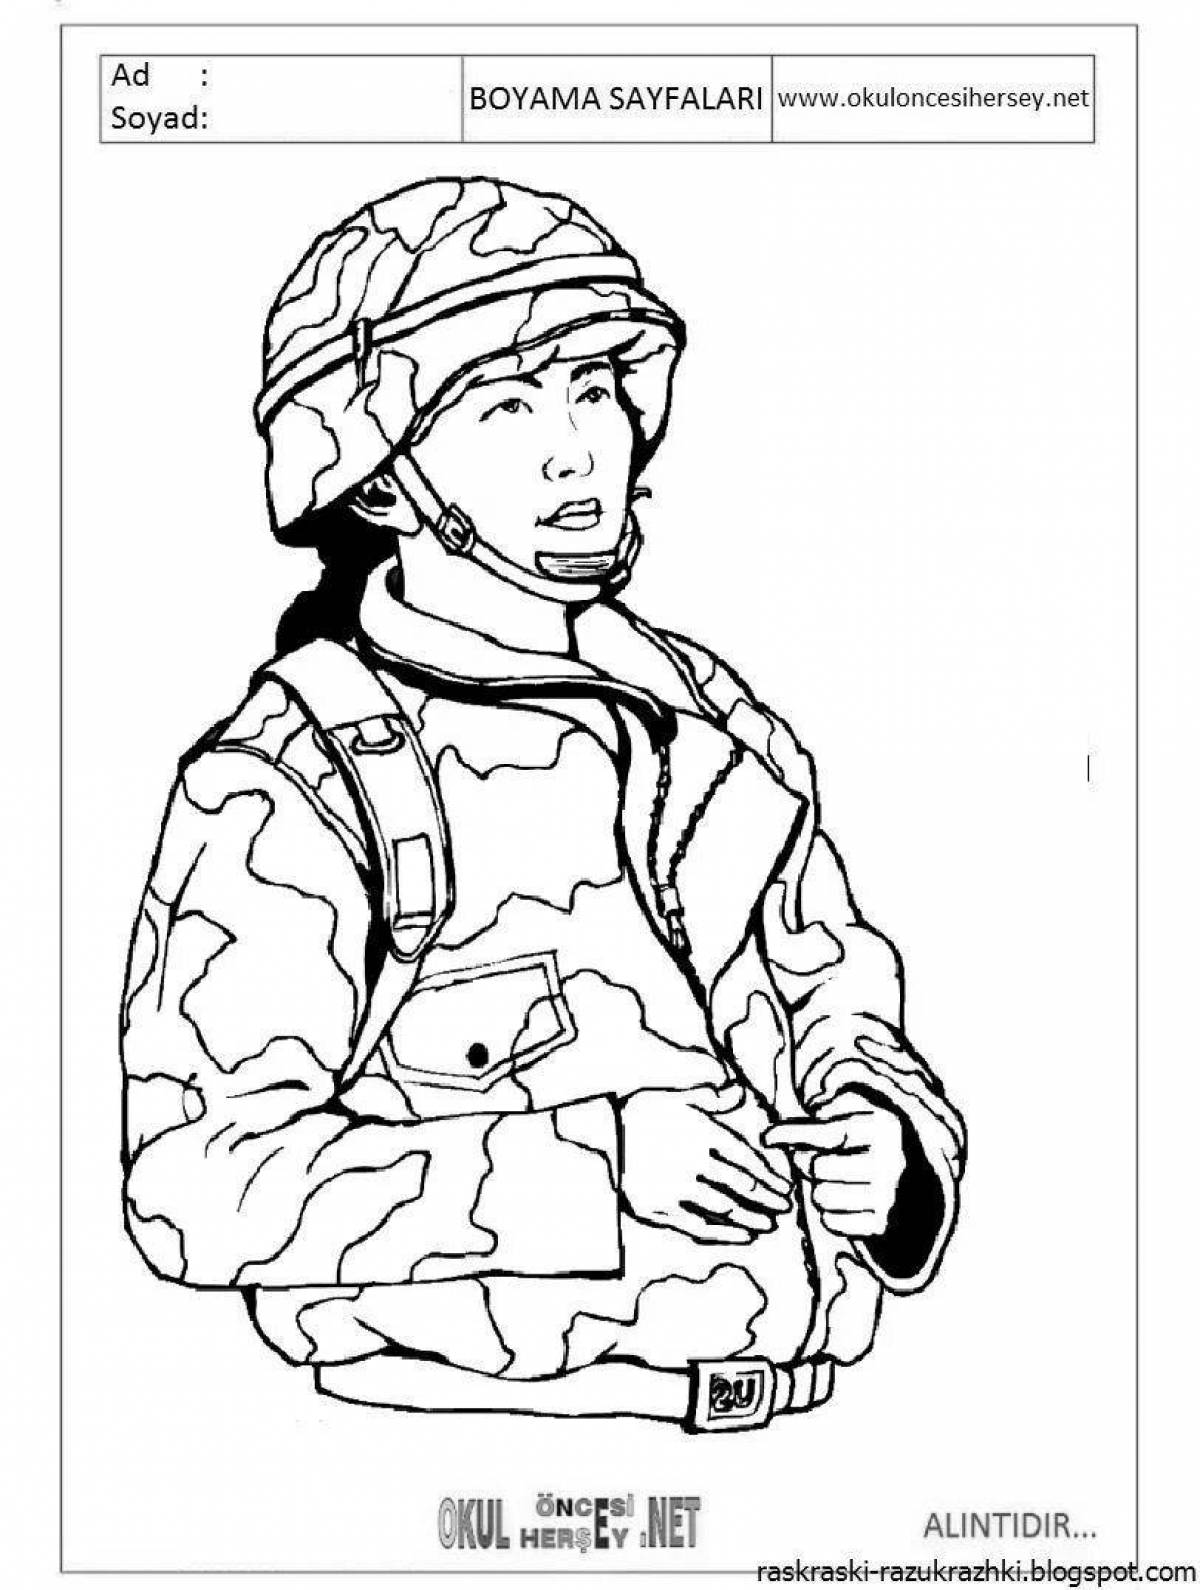 Funny military coloring for kids